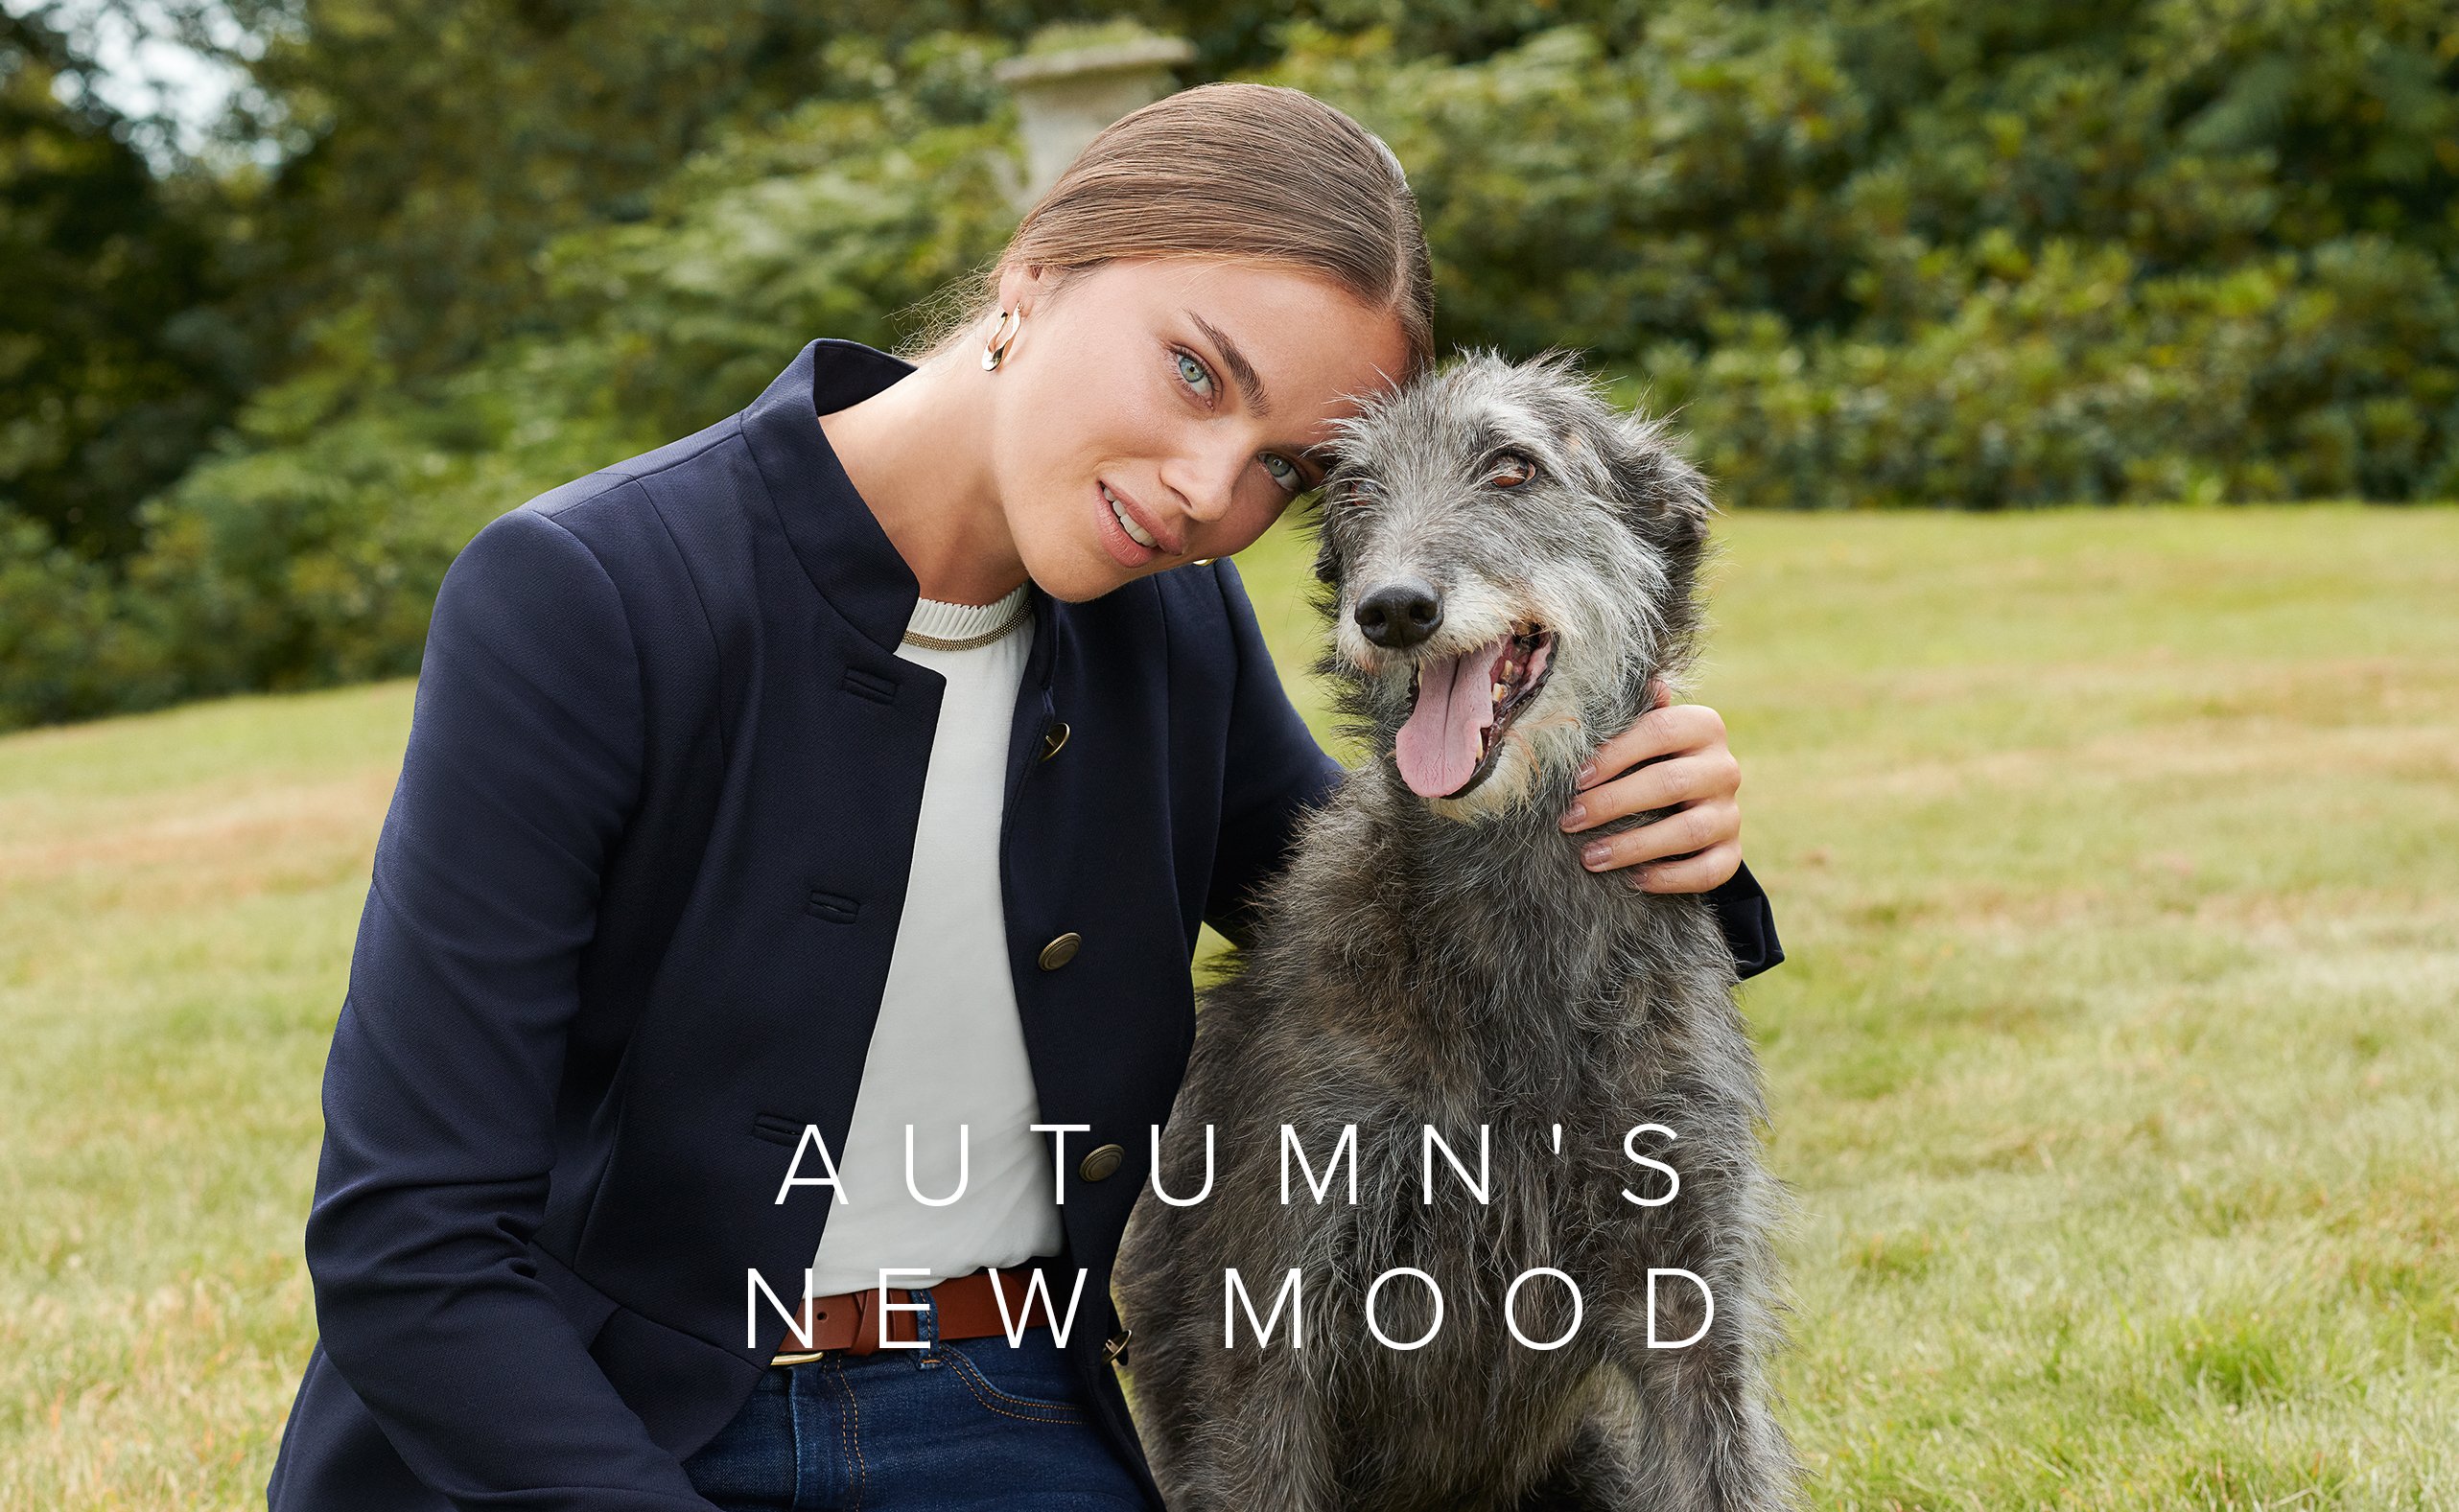 Model poses in a blue blazer next to a dog